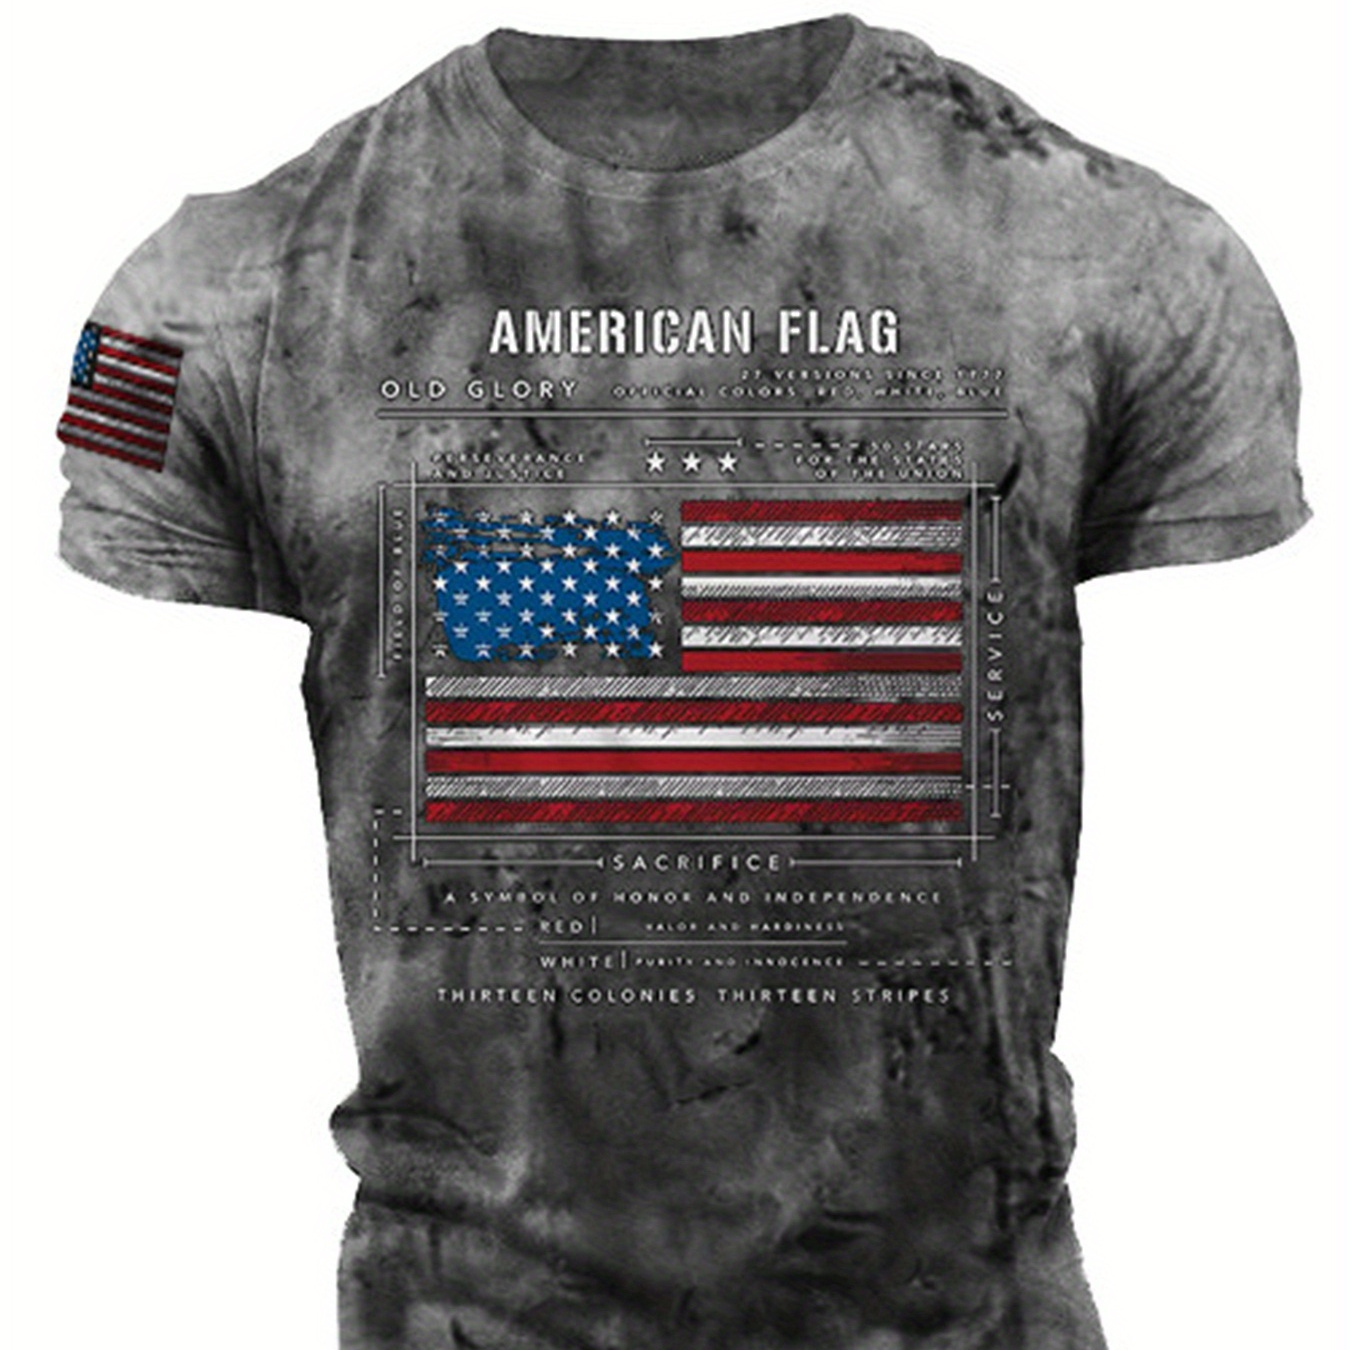 

American Flag Print, Men's Graphic Design Crew Neck Active T-shirt, Casual Comfy Tees Tshirts For Summer, Men's Clothing Tops For Daily Gym Workout Running